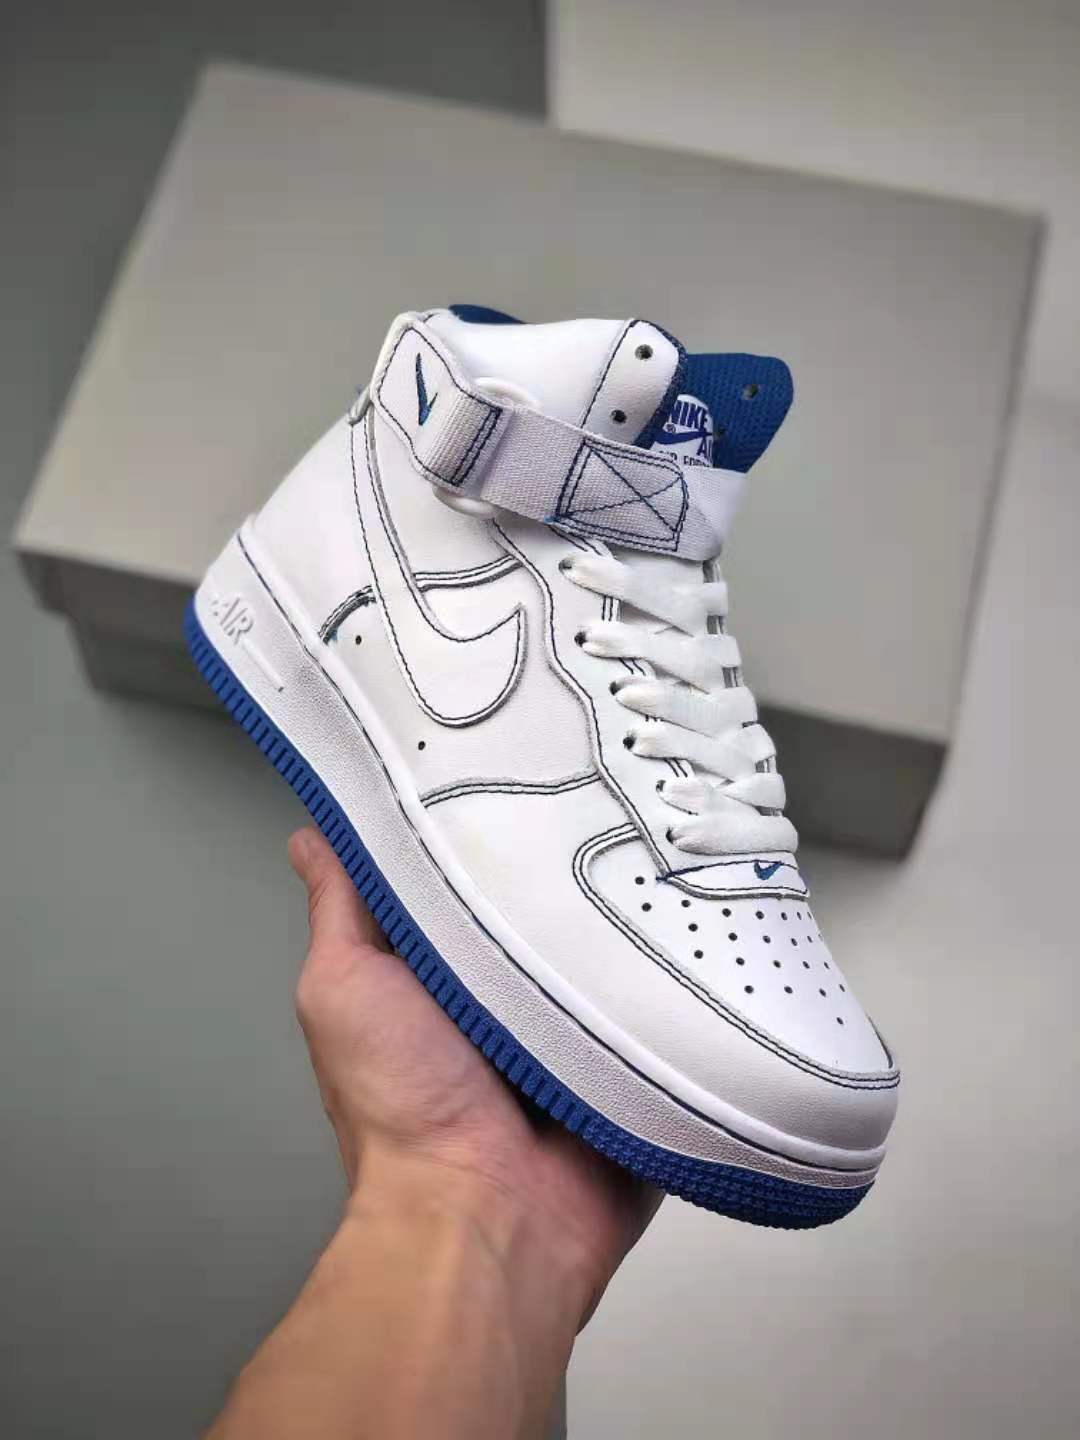 Nike Air Force 1 High White Royal Blue Contrast Stitch CV1753-101 - Classic Style with a Twist